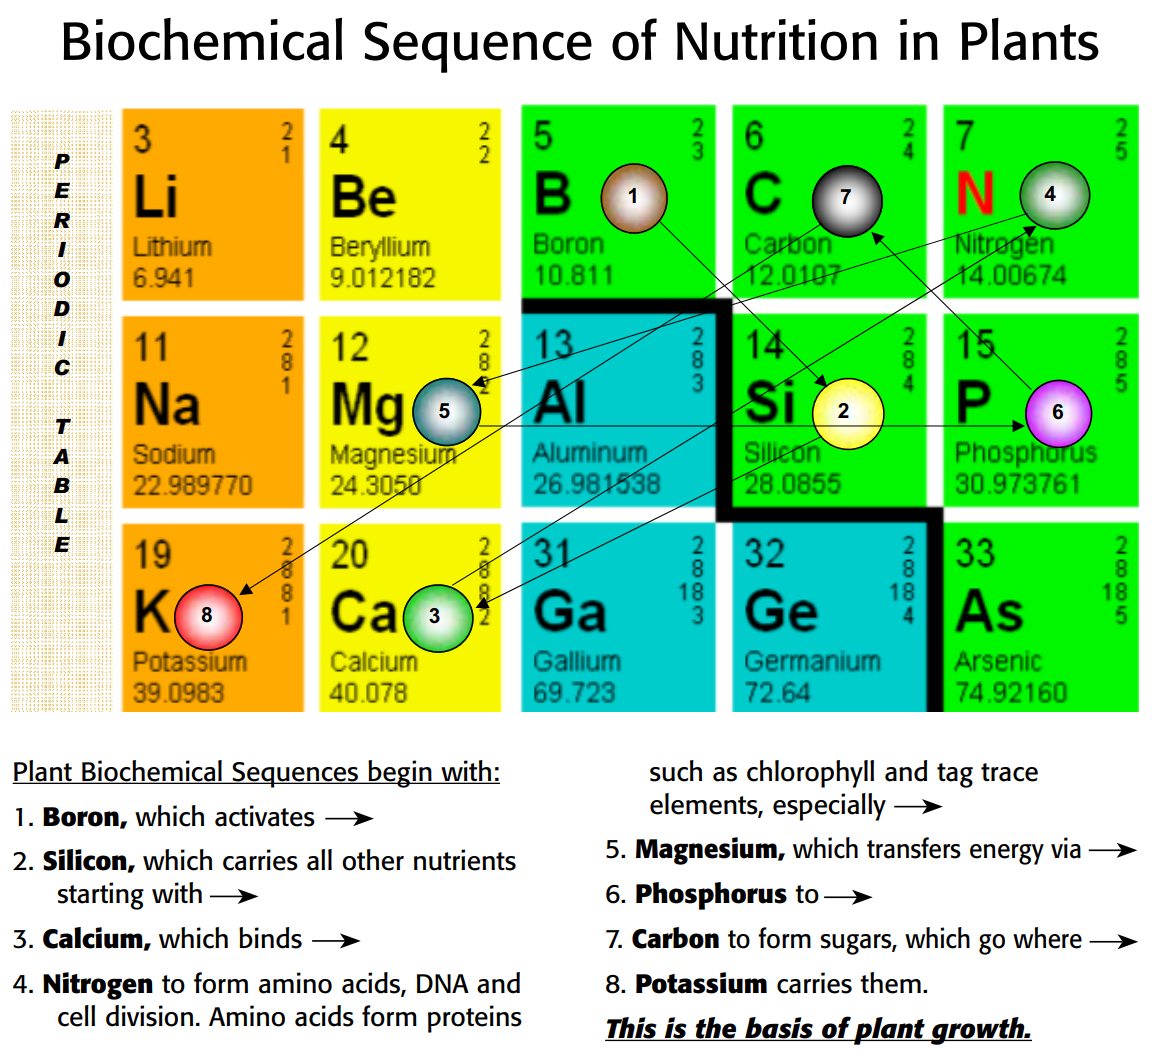 File:The biochemical sequence of nutrition in plants.png